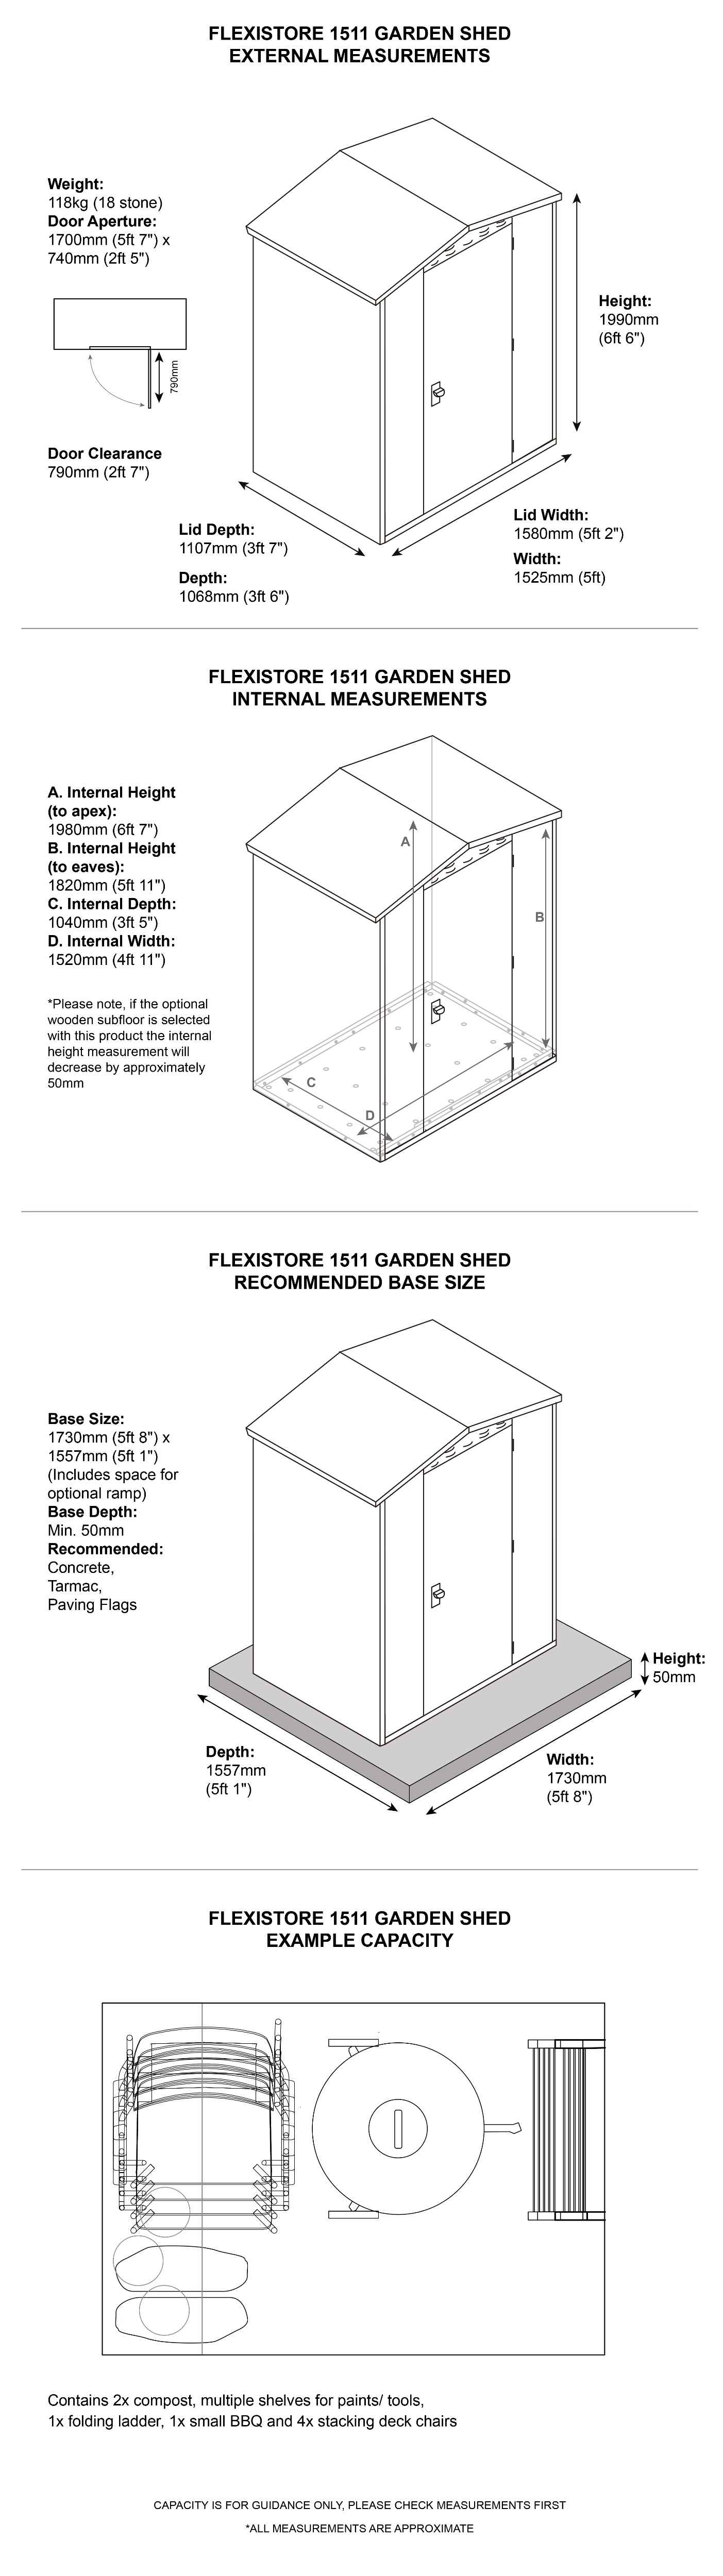 Flexistore Metal Shed Dimensions